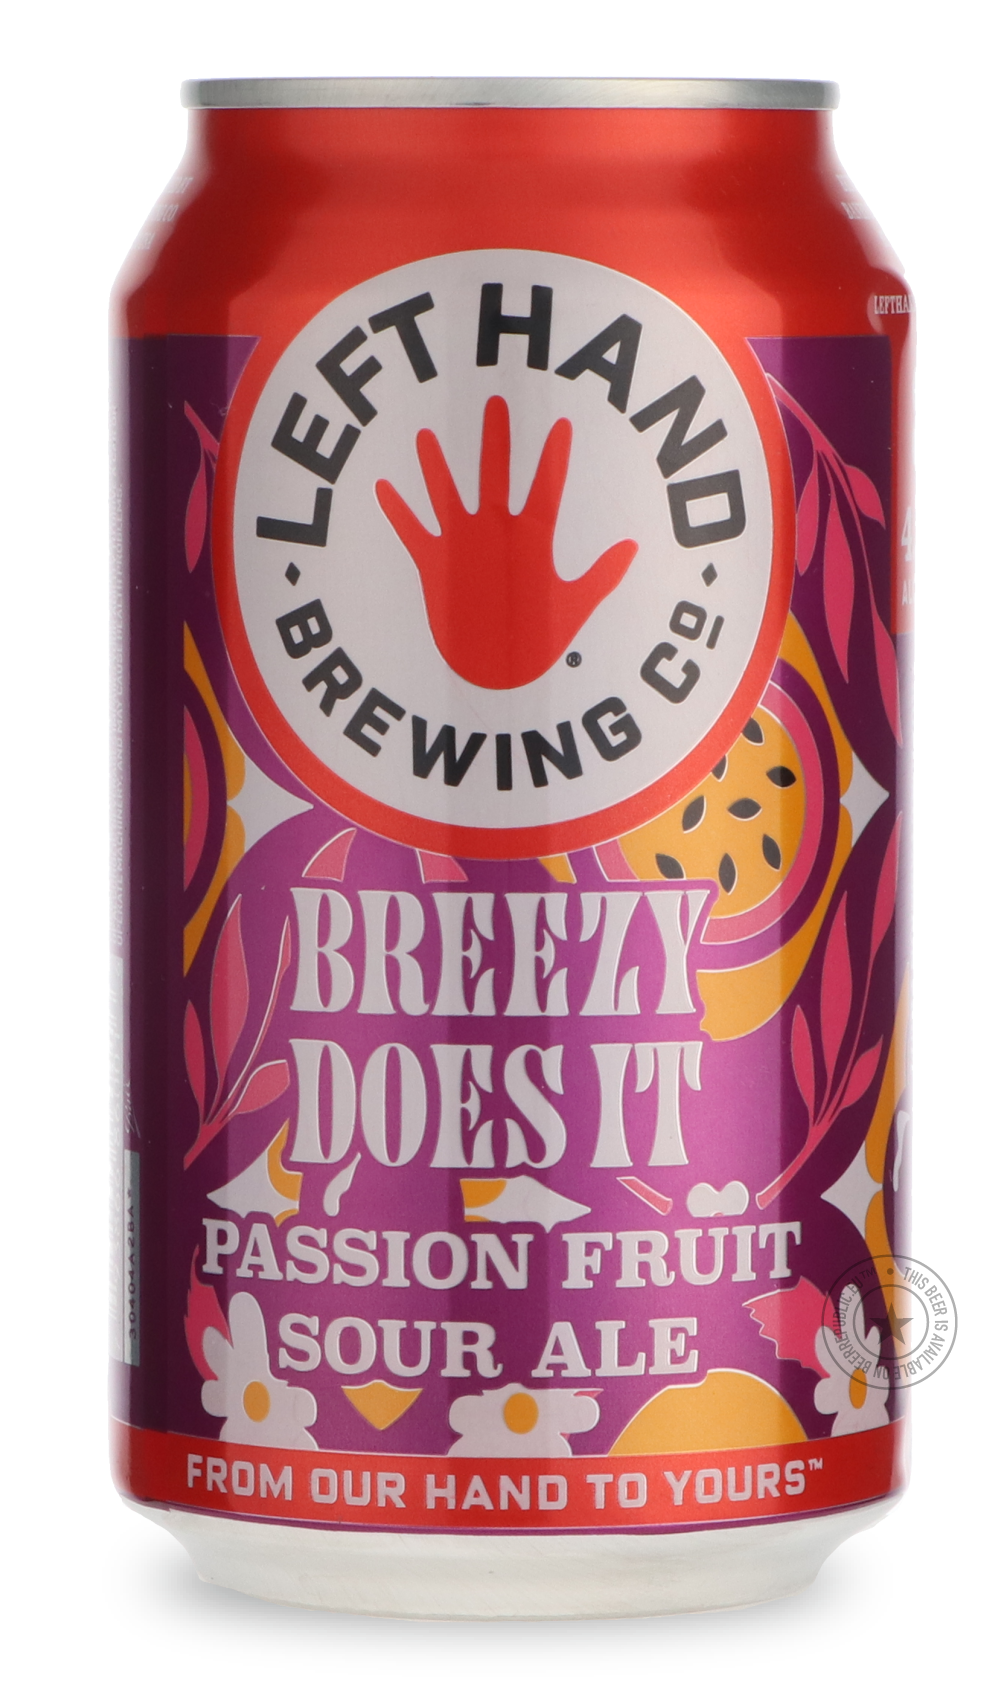 -Left Hand- Breezy Does It-Sour / Wild & Fruity- Only @ Beer Republic - The best online beer store for American & Canadian craft beer - Buy beer online from the USA and Canada - Bier online kopen - Amerikaans bier kopen - Craft beer store - Craft beer kopen - Amerikanisch bier kaufen - Bier online kaufen - Acheter biere online - IPA - Stout - Porter - New England IPA - Hazy IPA - Imperial Stout - Barrel Aged - Barrel Aged Imperial Stout - Brown - Dark beer - Blond - Blonde - Pilsner - Lager - Wheat - Weizen